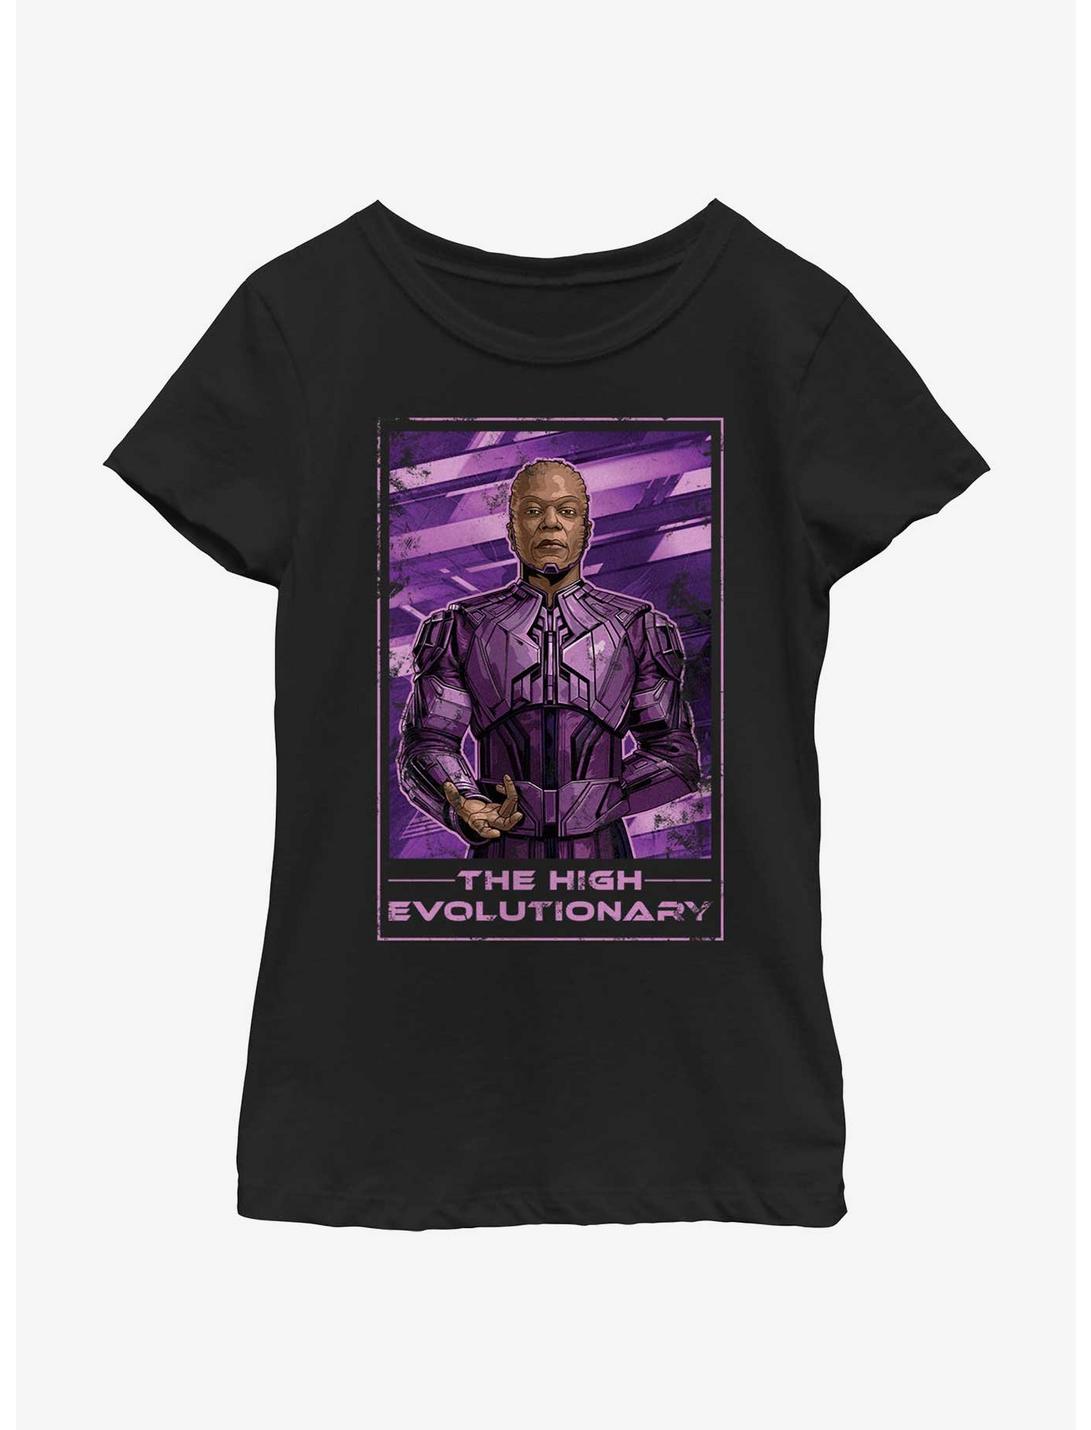 Marvel Guardians of the Galaxy Vol. 3 High Evolutionary Poster Youth Girls T-Shirt, BLACK, hi-res